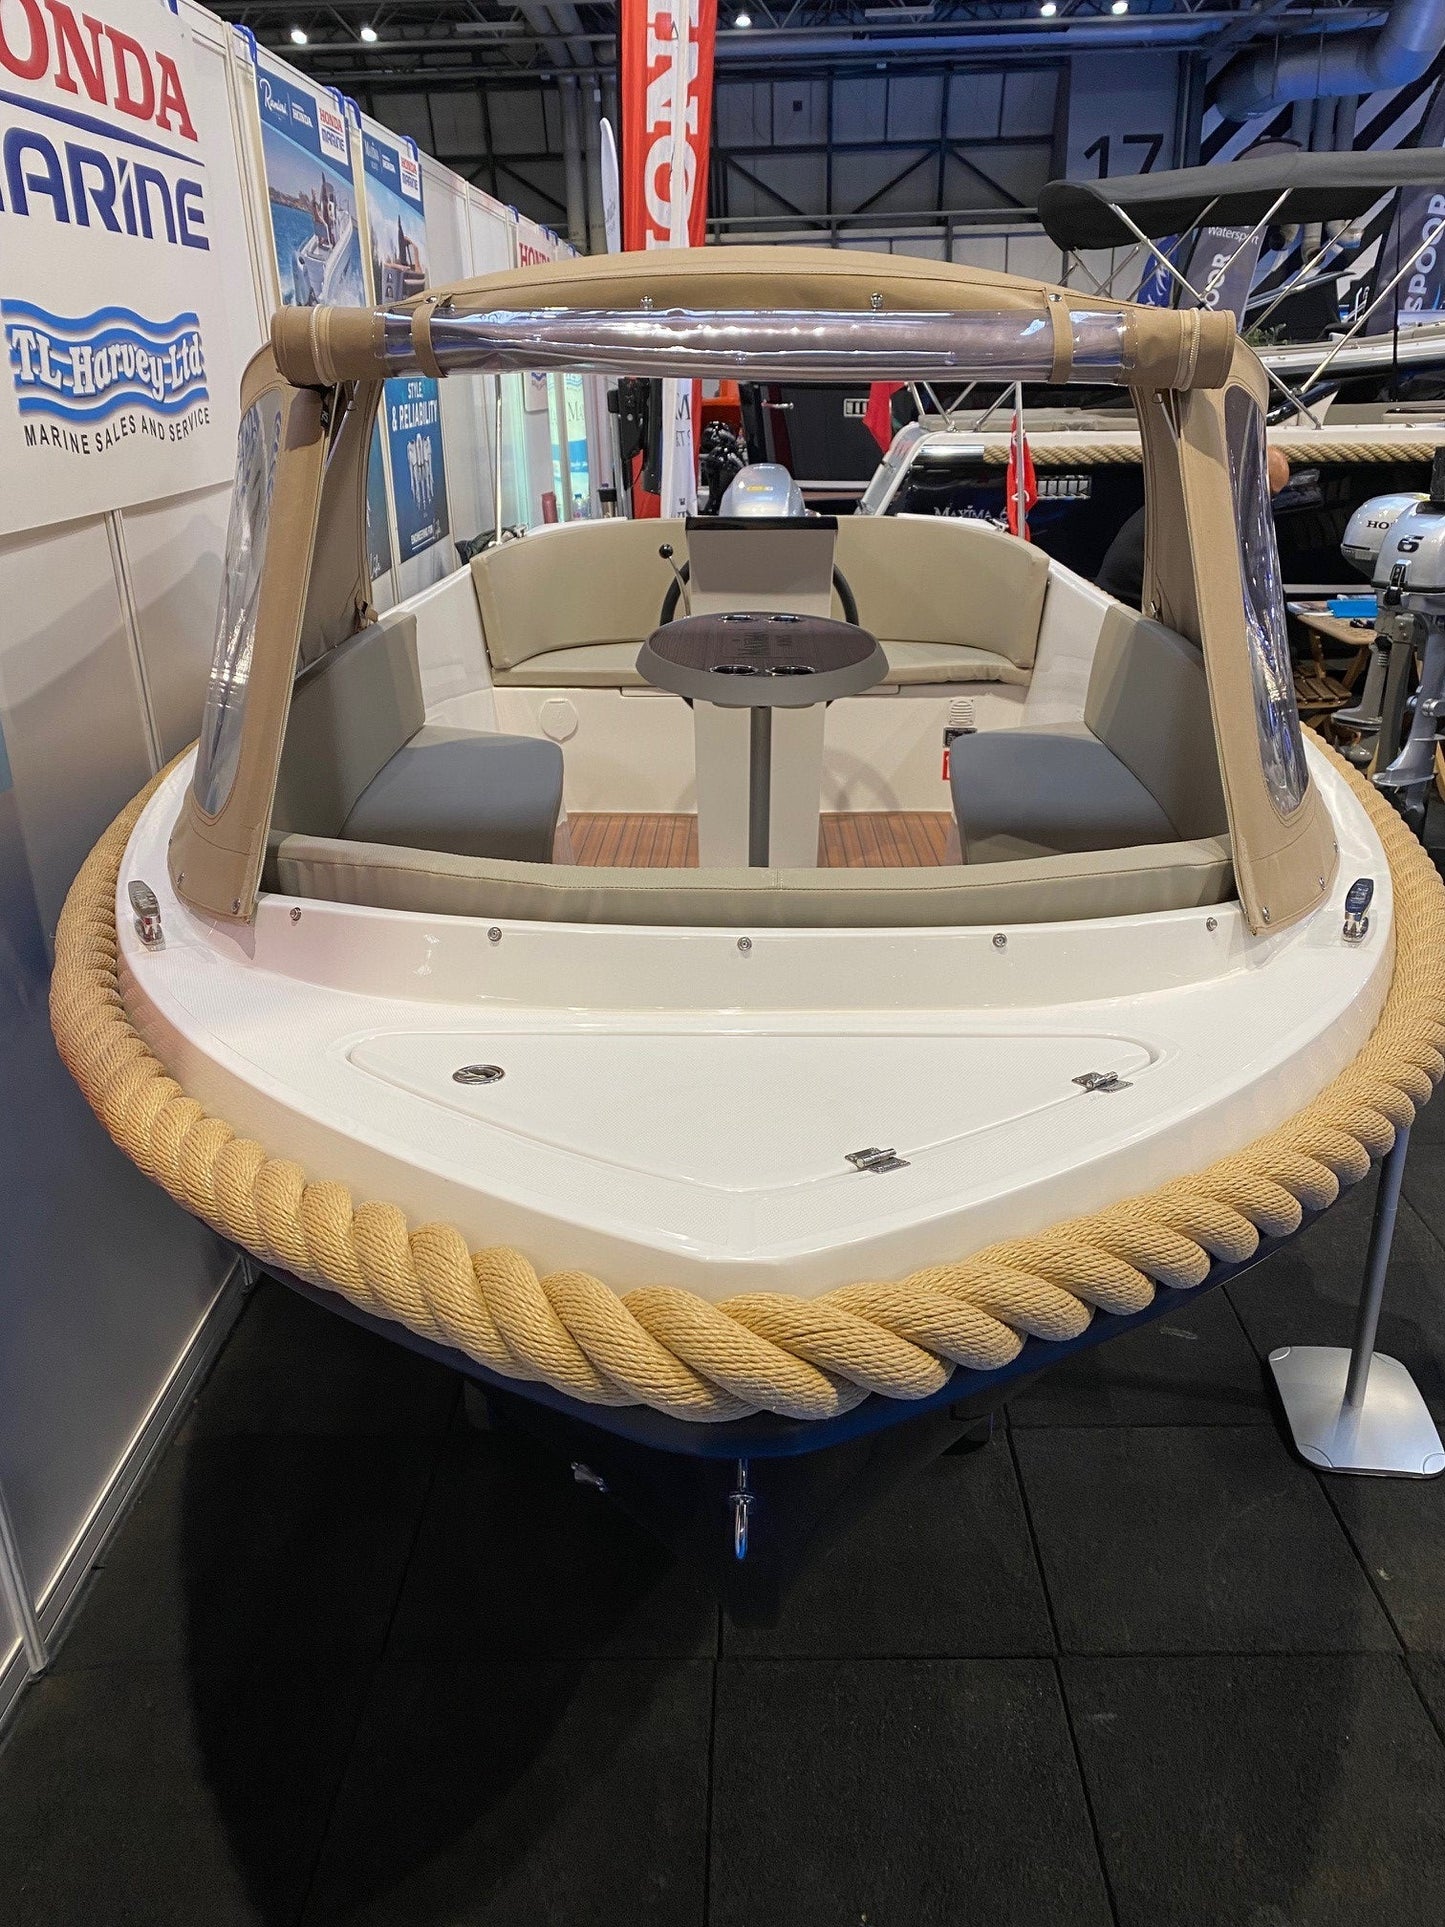 Maxima 550 Boat powered by Honda BF15 15hp In Stock Now